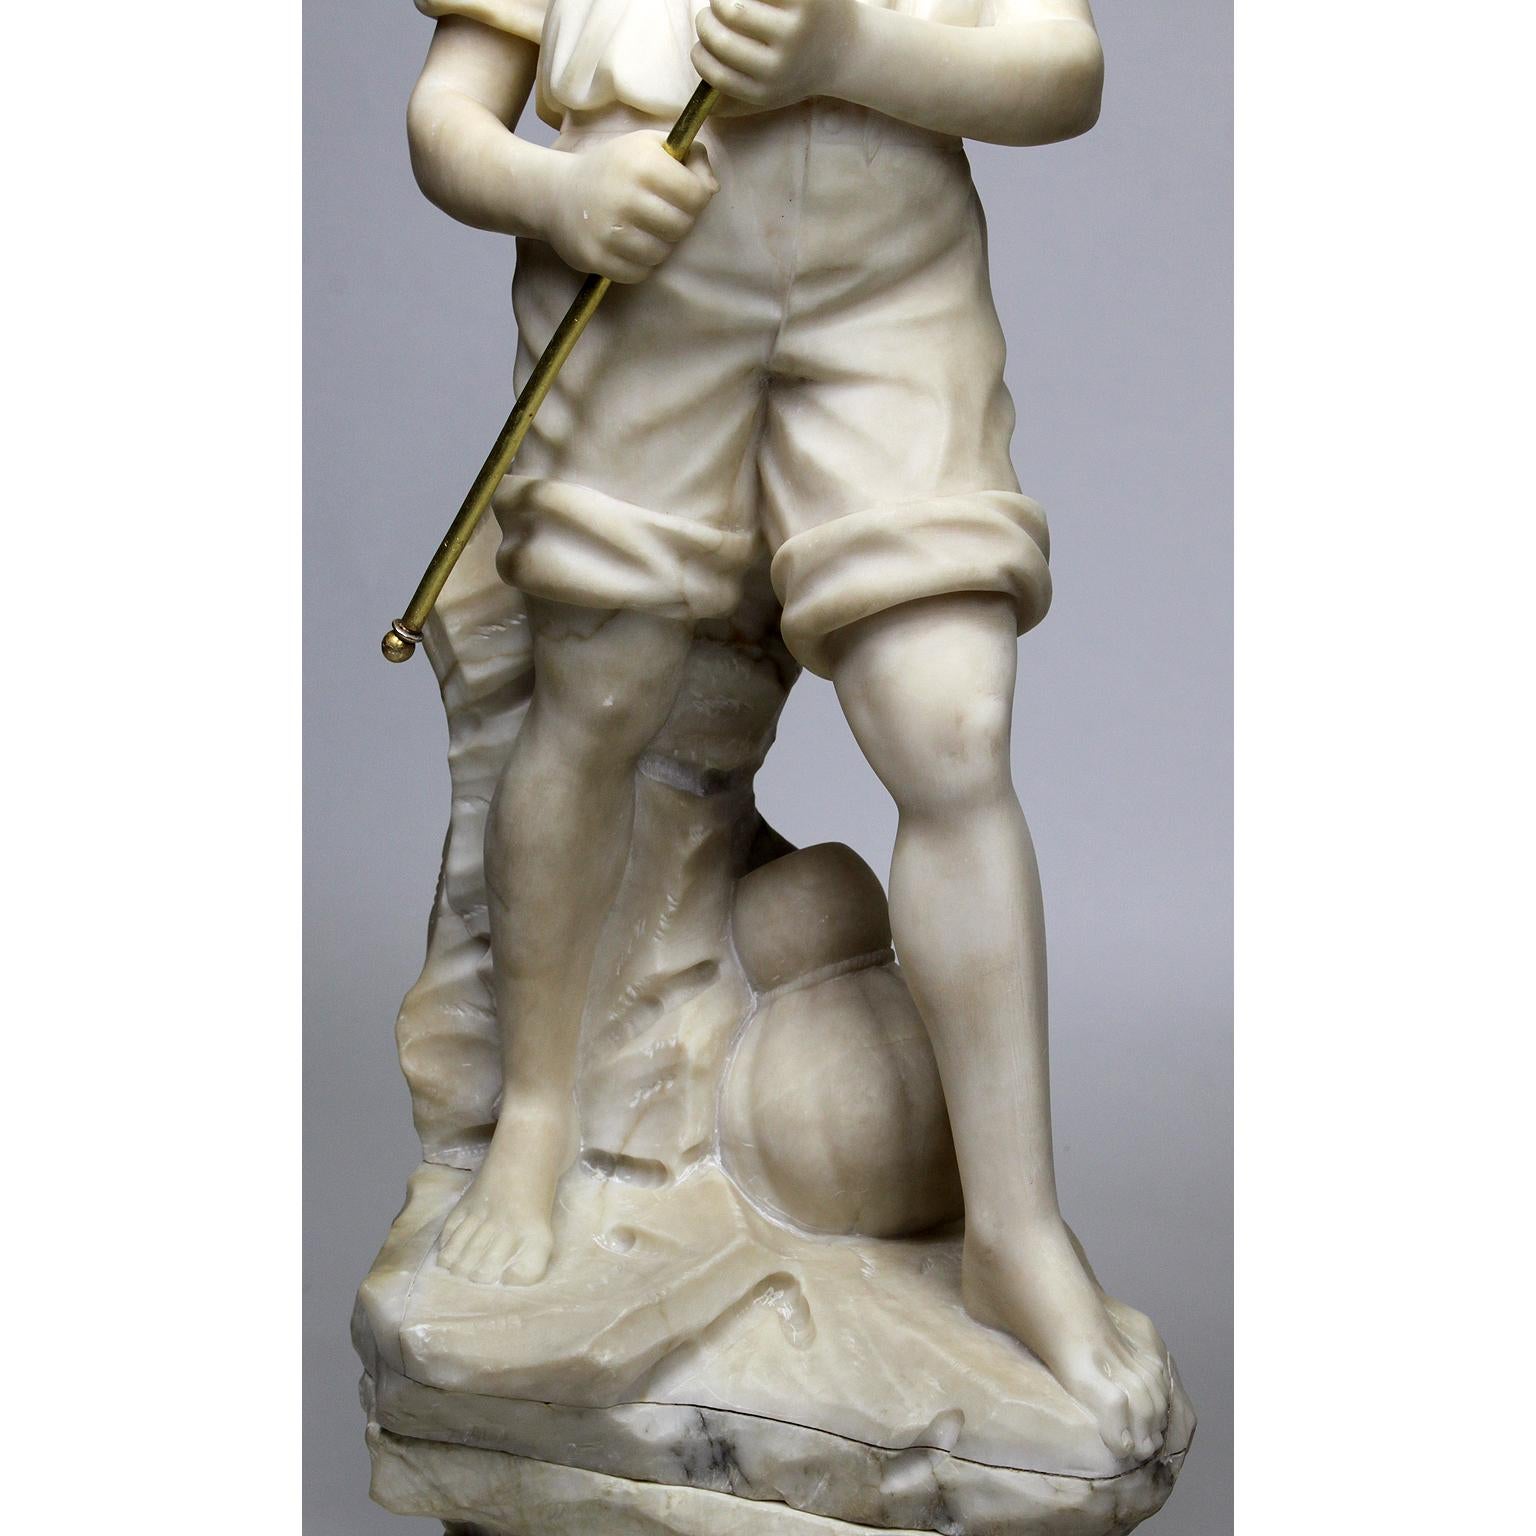 Charming Italian 19th-20th Century Carved Alabaster Figure of a Fisher Boy For Sale 2